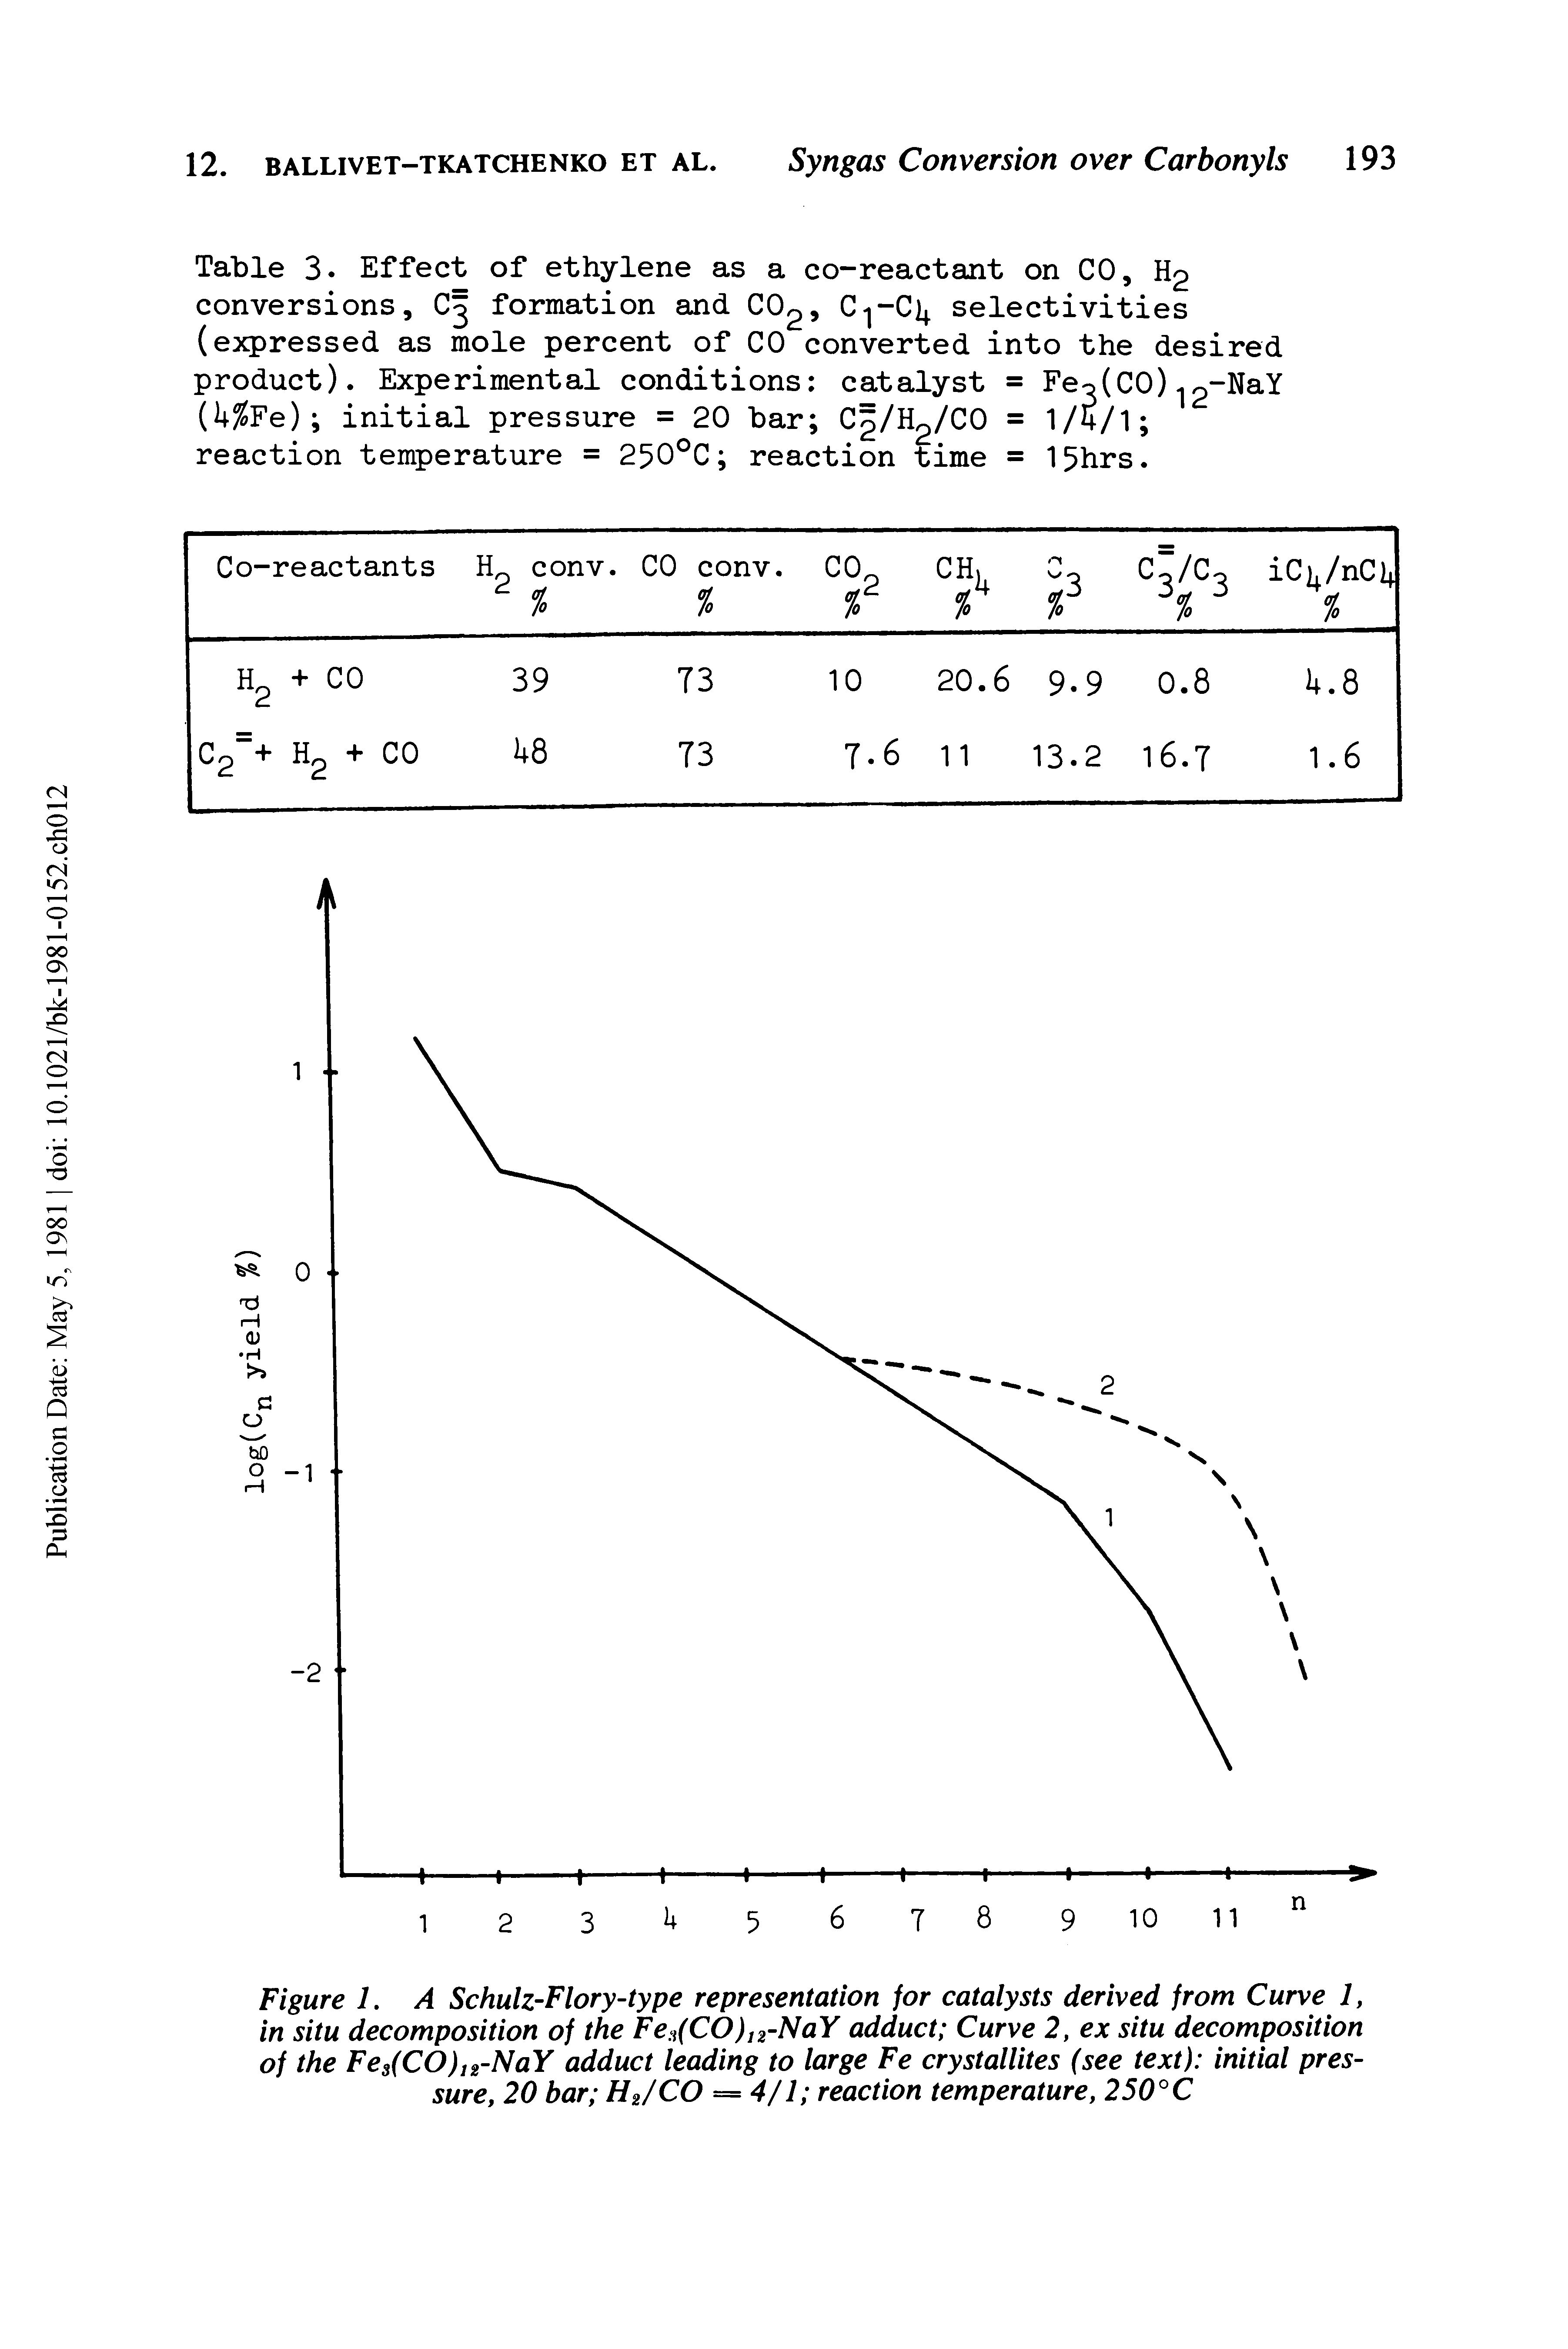 Figure 1. A Schulz-Flory-type representation for catalysts derived from Curve 1, in situ decomposition of the Fe. (CO)I2-NaY adduct Curve 2, ex situ decomposition of the Fe3(CO)n-NaY adduct leading to large Fe crystallites (see text) initial pressure, 20 bar H2/CO = 4/1 reaction temperature, 250°C...